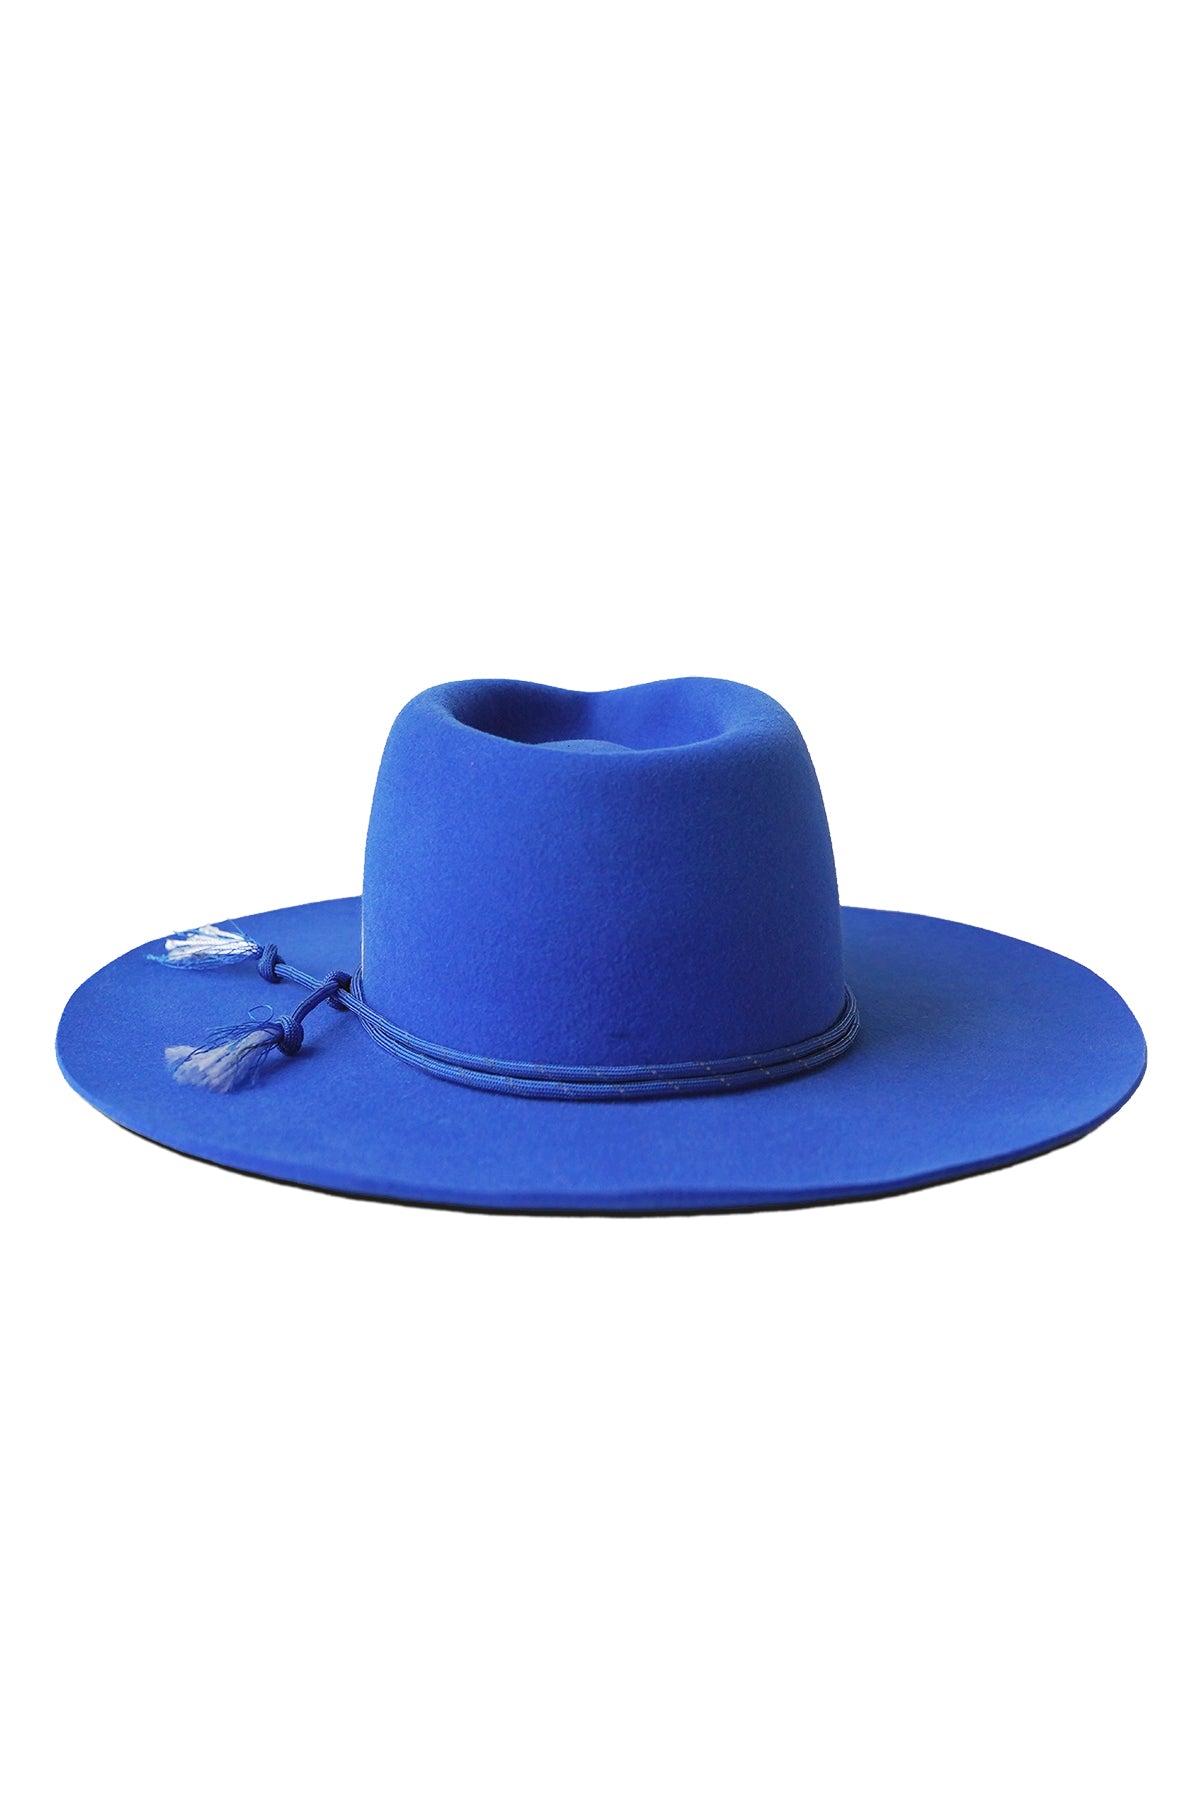 Unisex blue fur felt fedora hat with a wide brim and paracord, handcrafted by SoonNoon in Stockholm